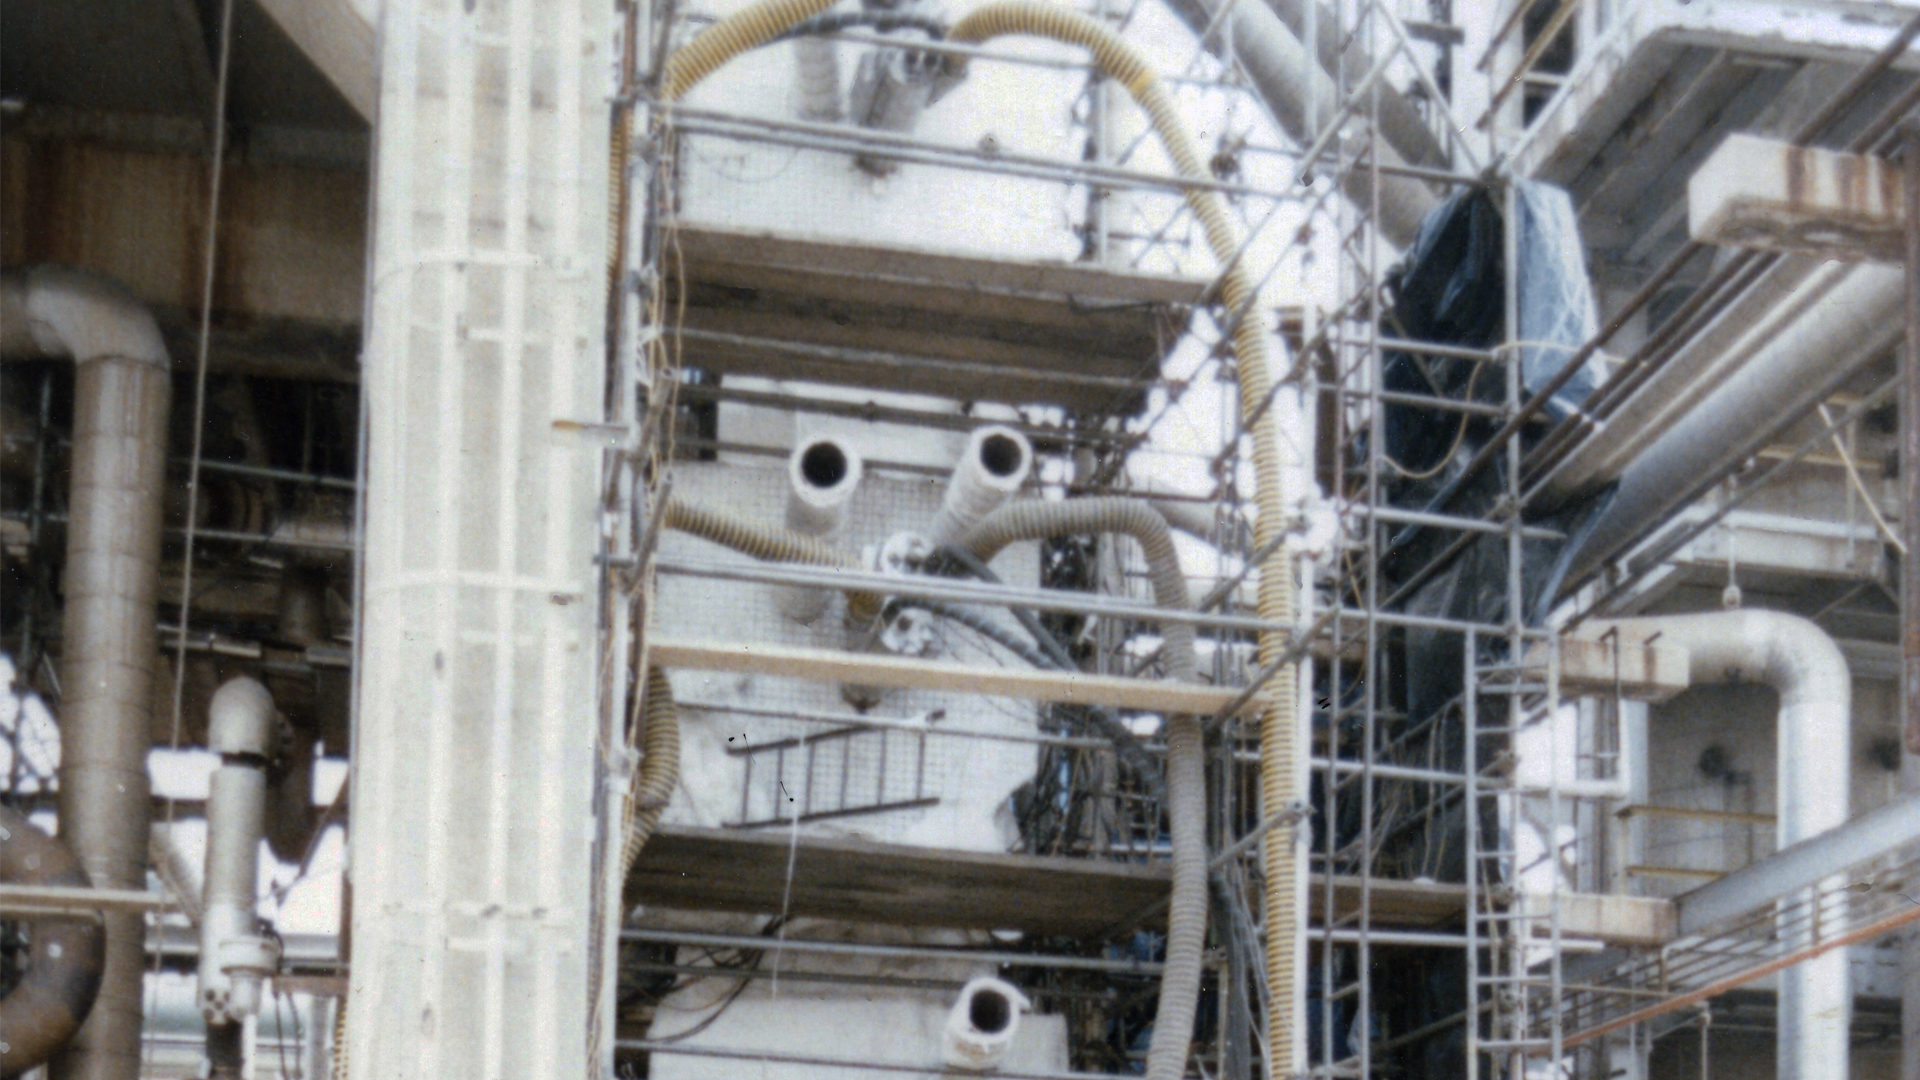 Stress relieving three heat exchangers simultaneously at a refinery in Pennsylvania.